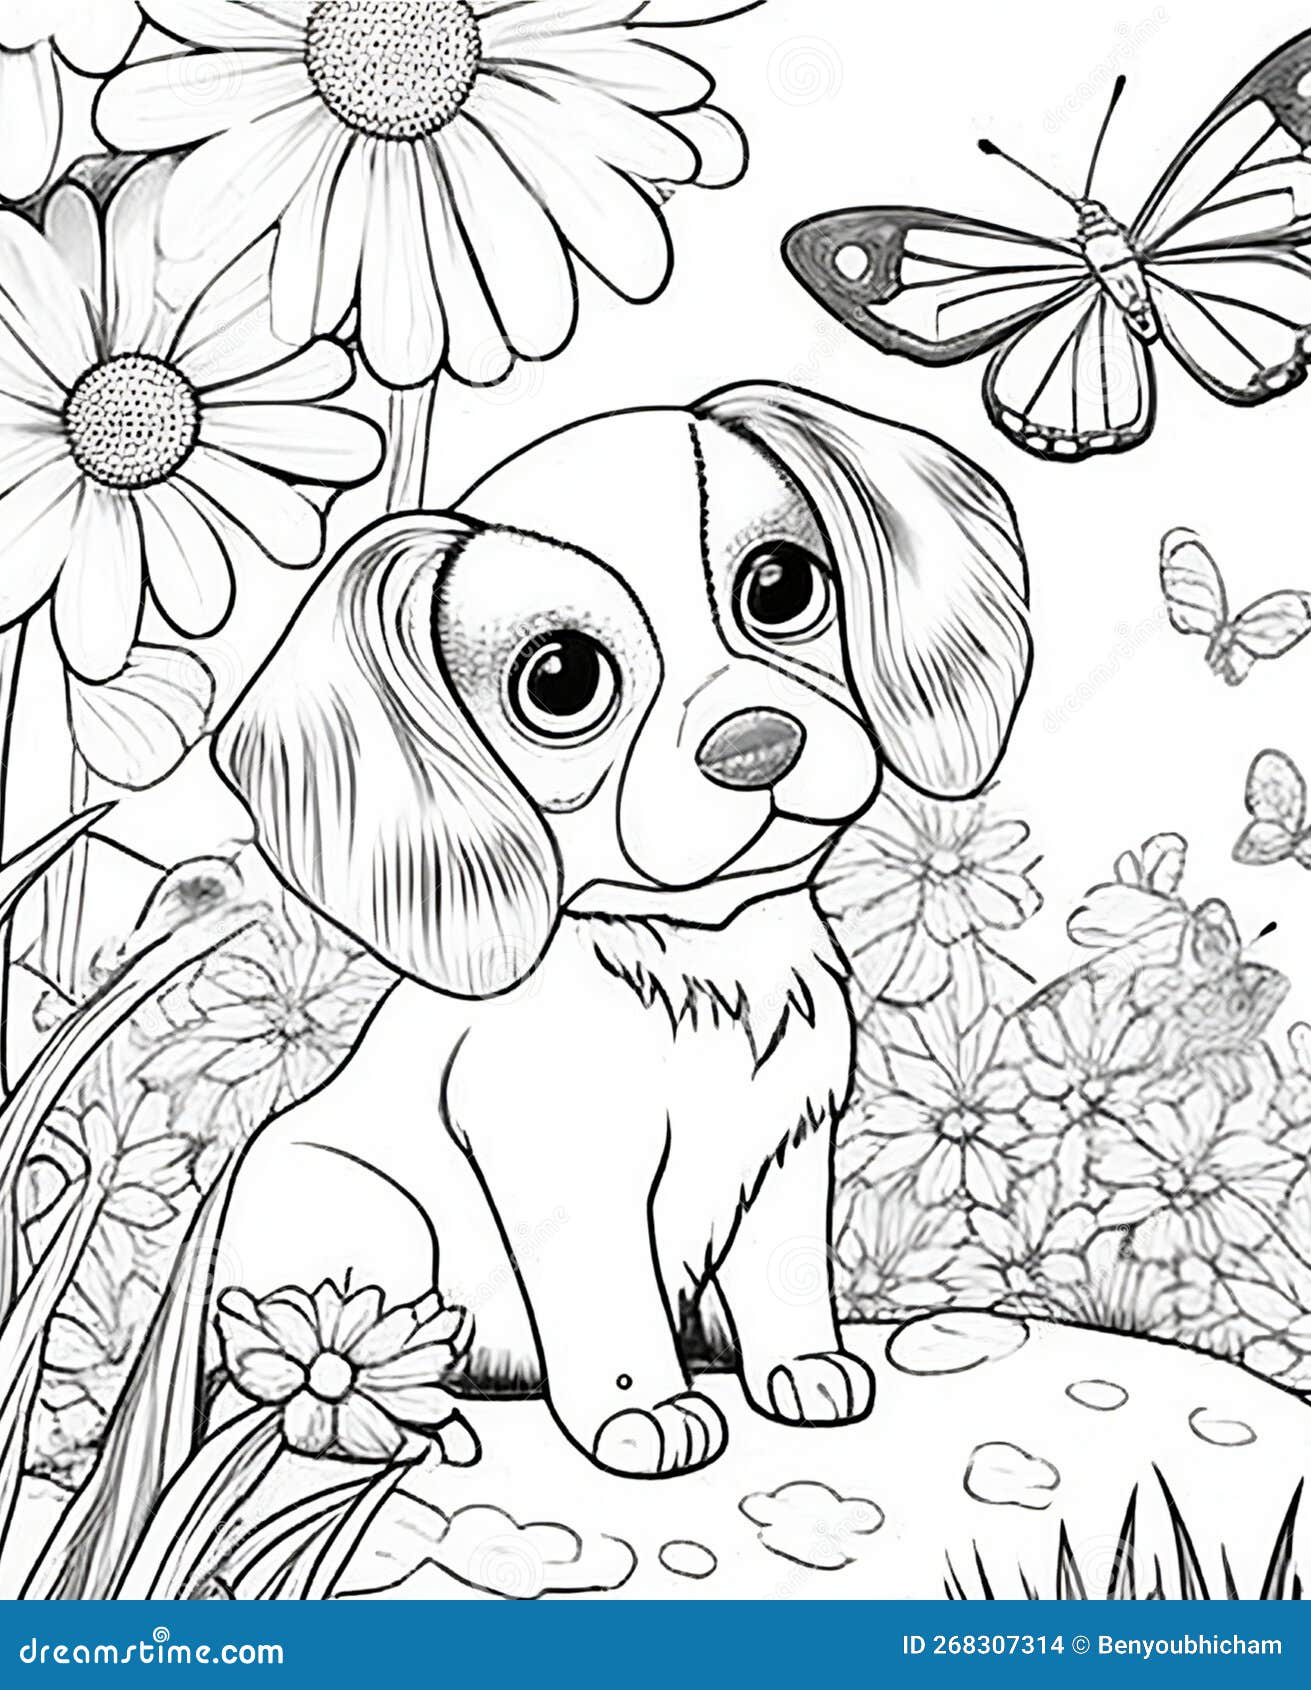 The cutest dog coloring pages for dog lovers stock photo